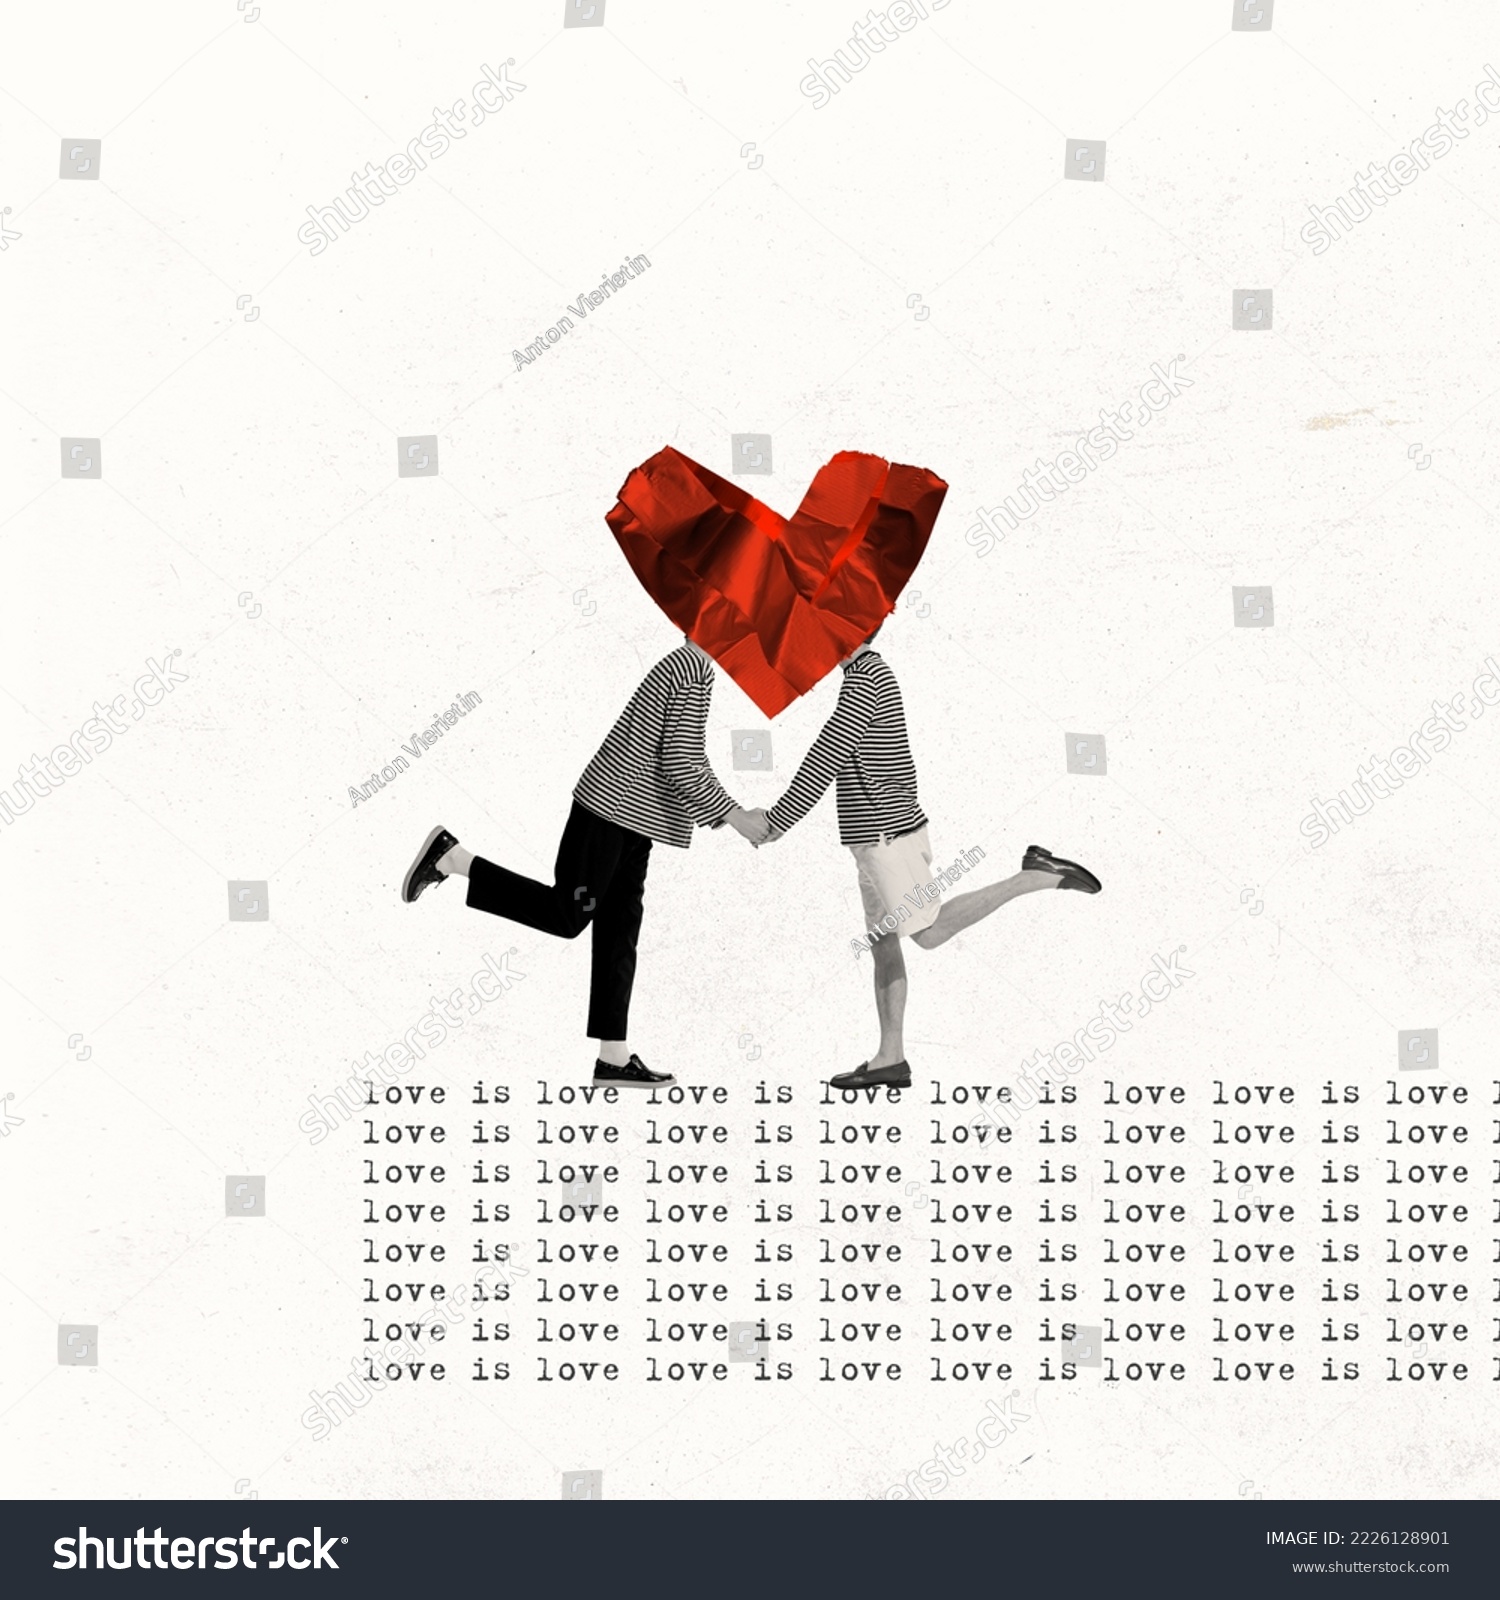 Contemporary art collage. Creative design in retro style. Two men kissing behind heart shape. Equal love. LGBT. Concept of relationship, Valentine's Day, love, freedom, feelings. Copy space for ad #2226128901